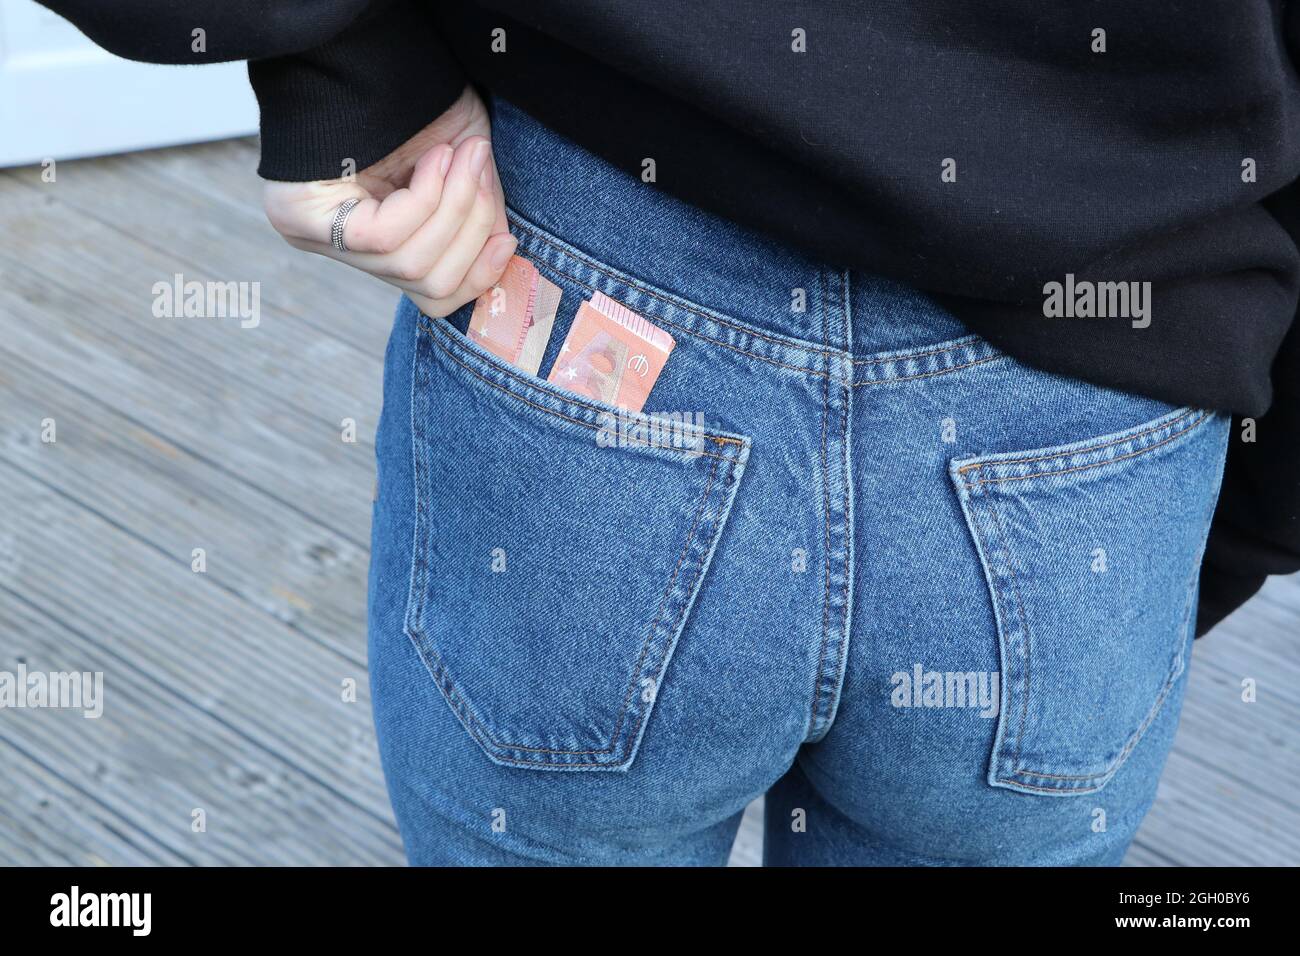 Pocket money, young adult with euro notes in back pocket of jeans Stock Photo